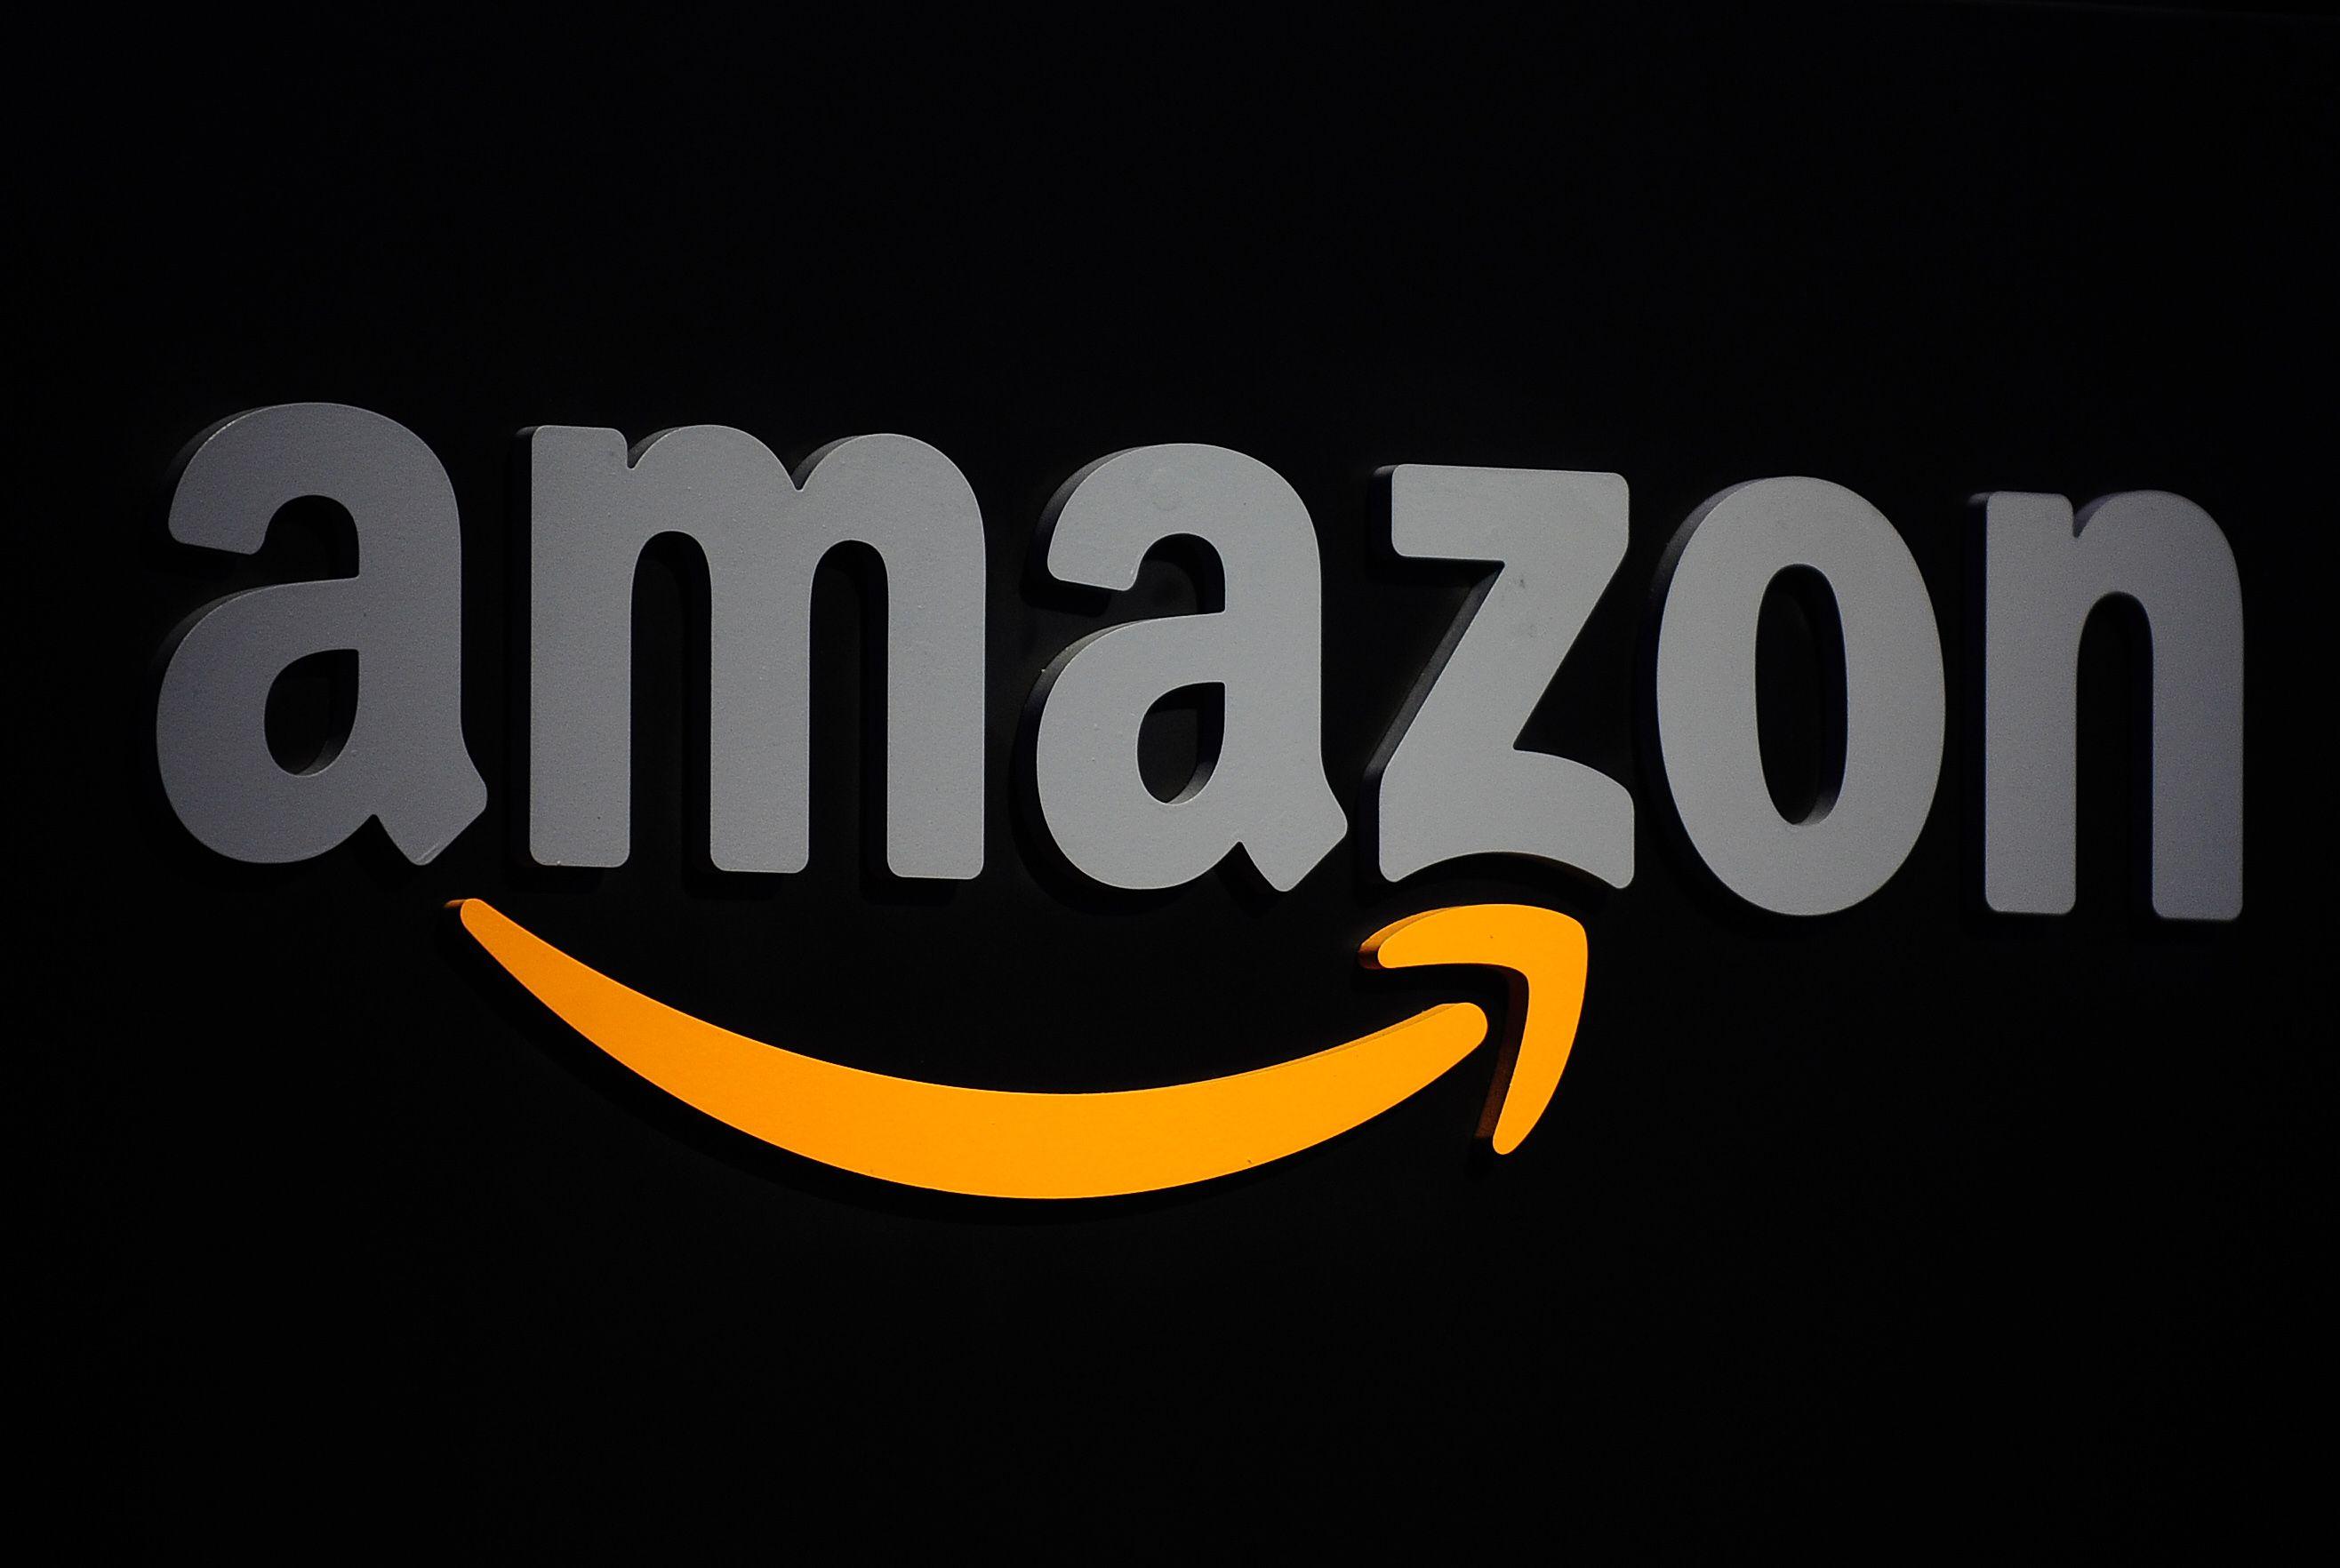 New Amazon Logo - Amazon Prime 4K Streaming Set to Launch by End of Year | Time